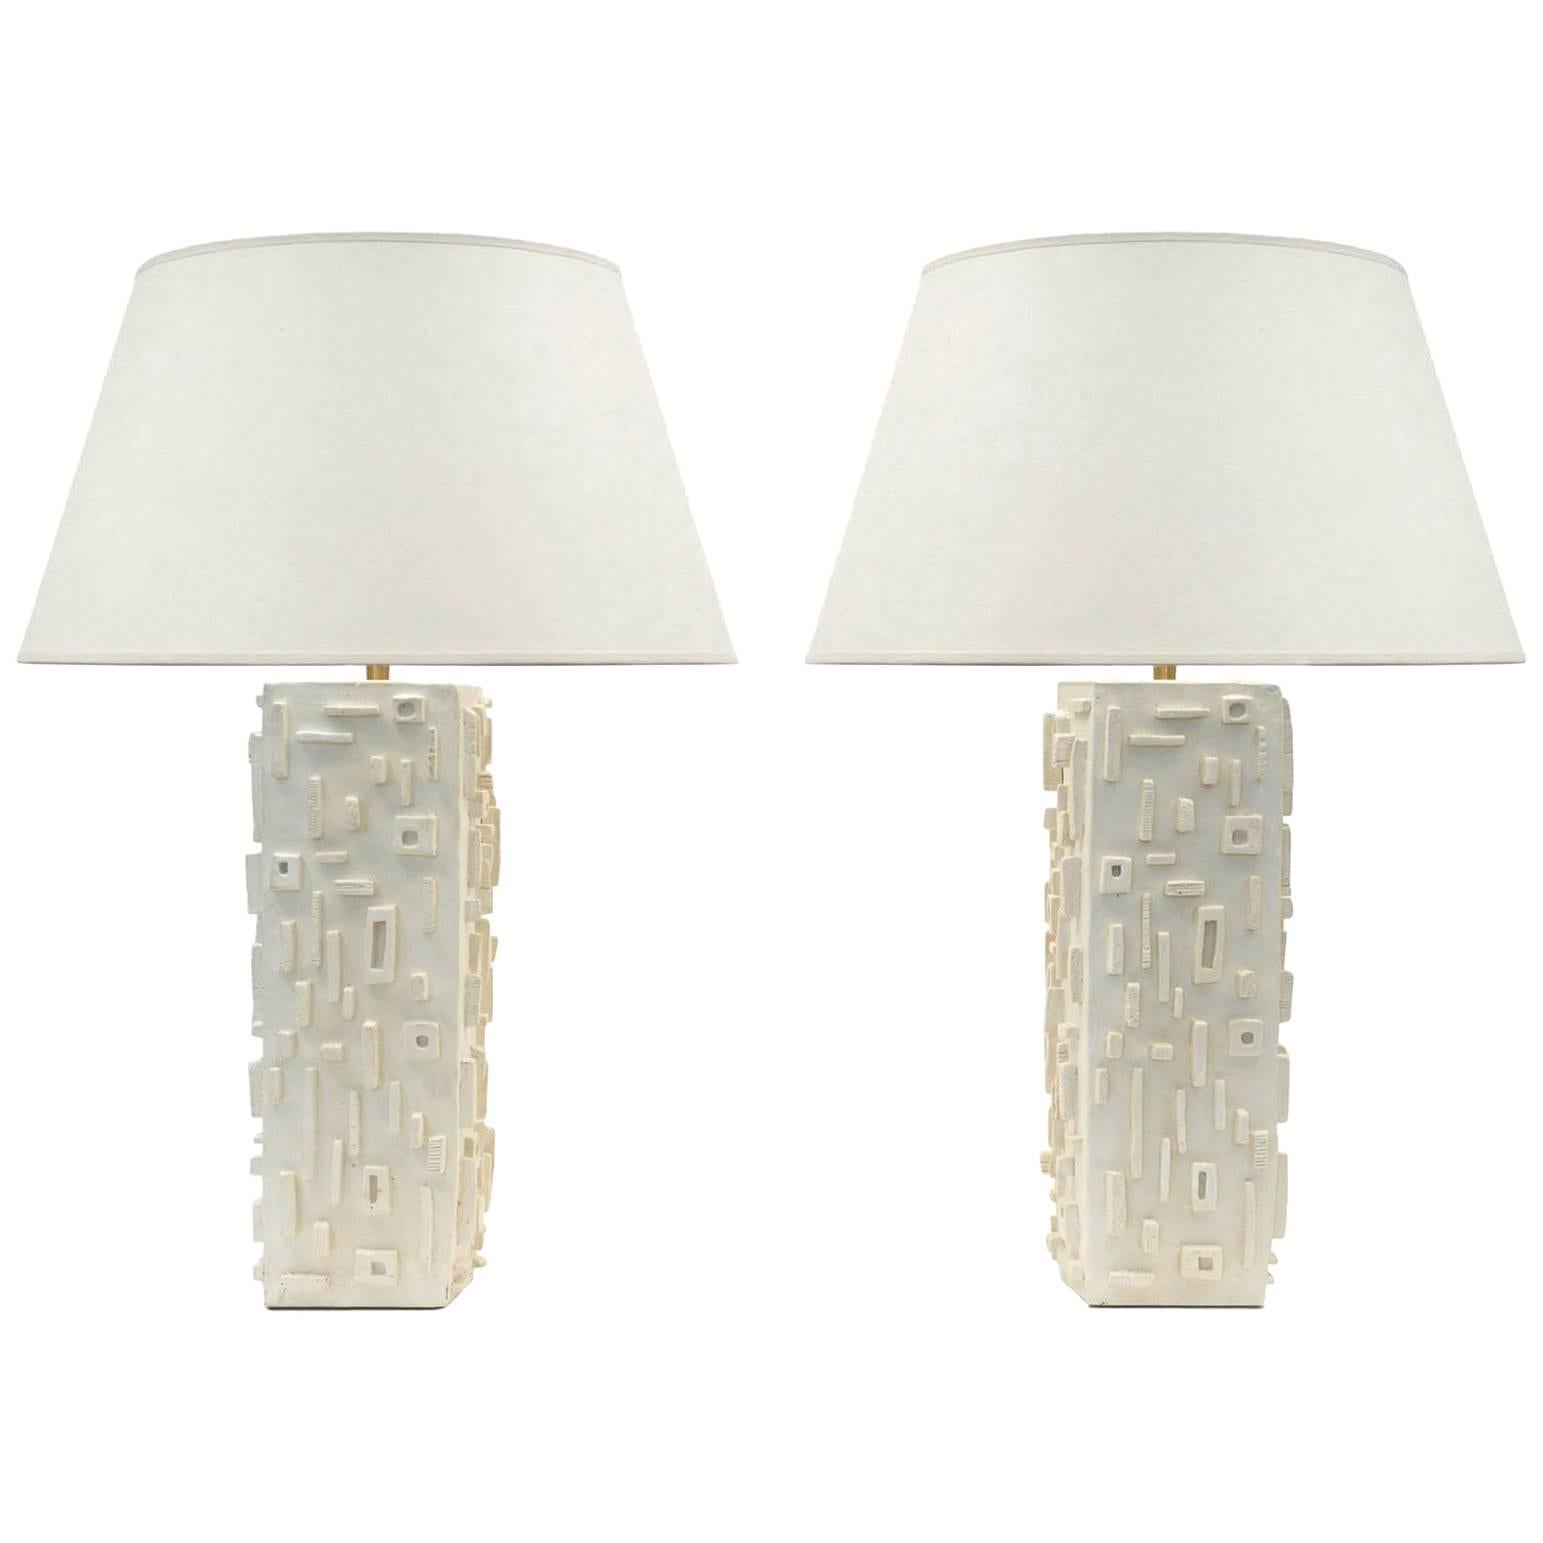 Pair of Modern Plaster Table Lamps with a Carved Geometric Pattern, France